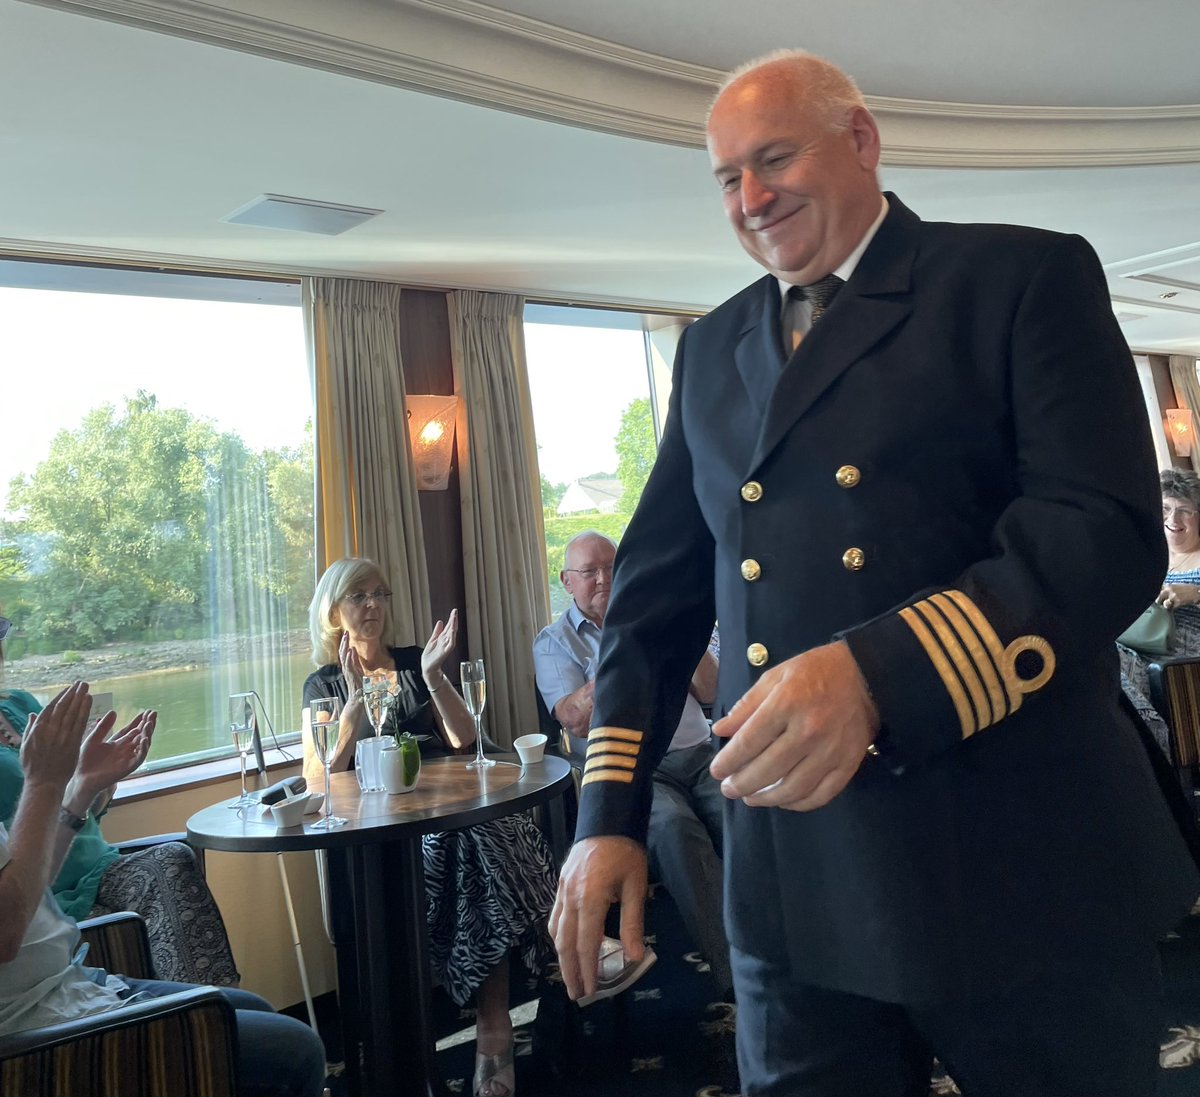 This guy is driving us in Seine! Captain Alain is warmly applauded by passengers at the cocktail reception on @rivieratravel ship Jane Austen